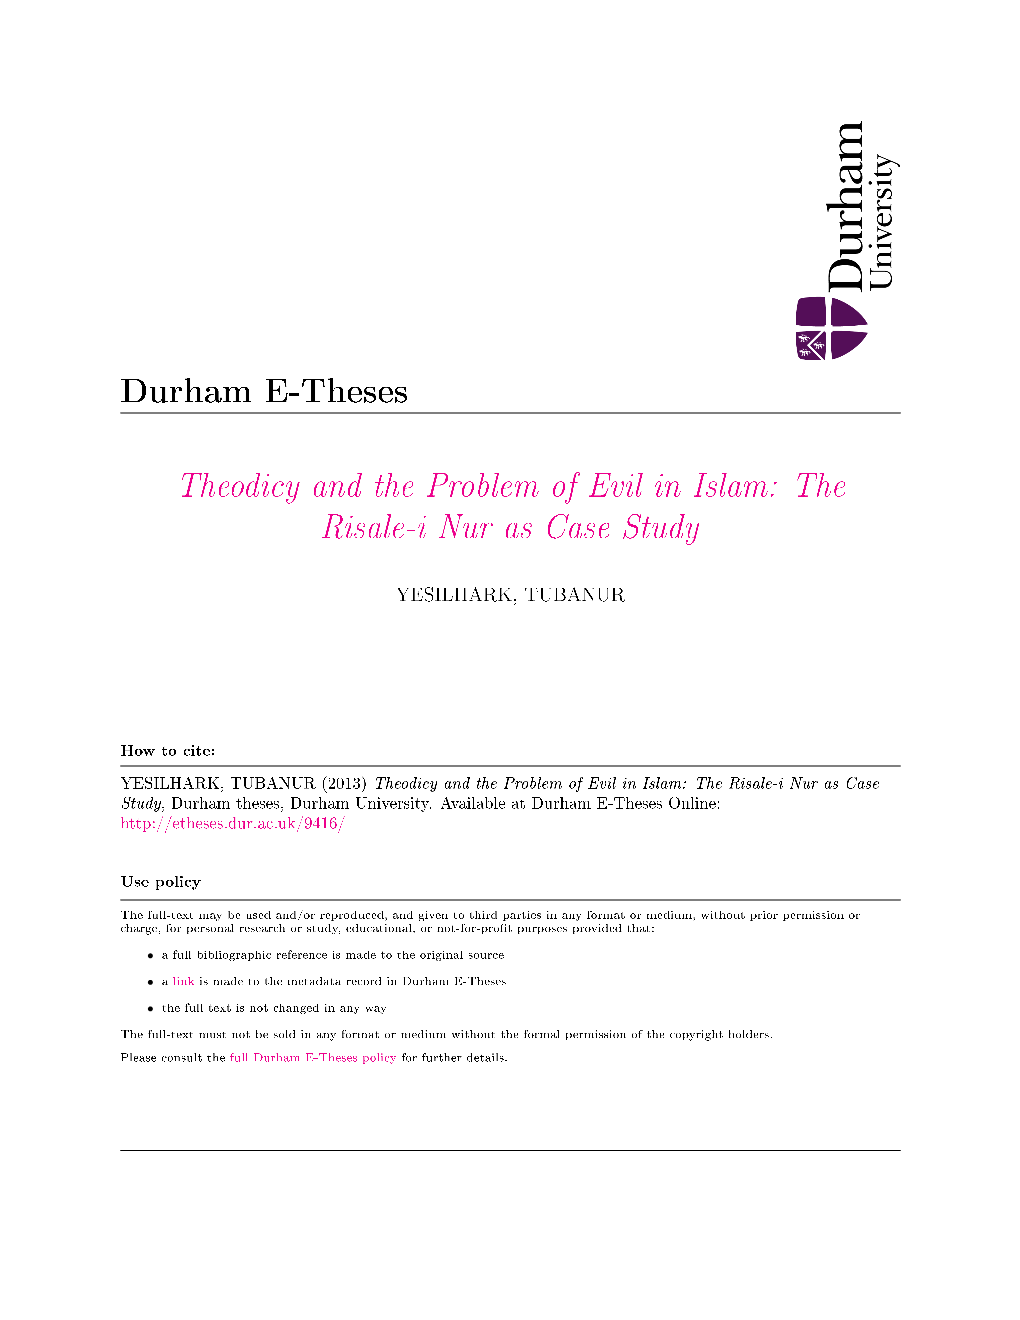 Theodicy and the Problem of Evil in Islām